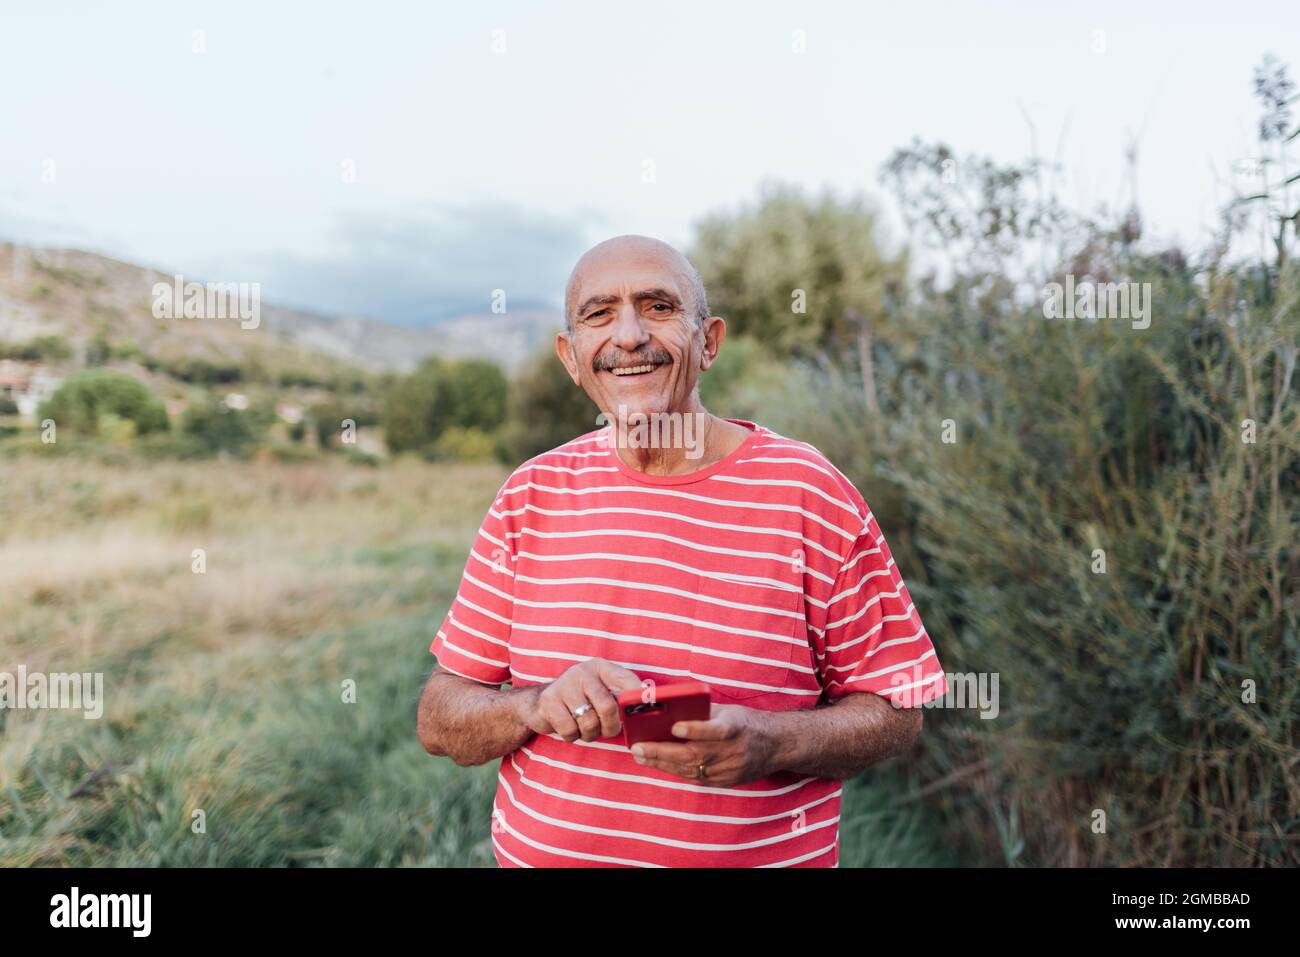 Middle-aged man looking at the camera and smiling while using a mobile phone outdoors in the countryside. Stock Photo